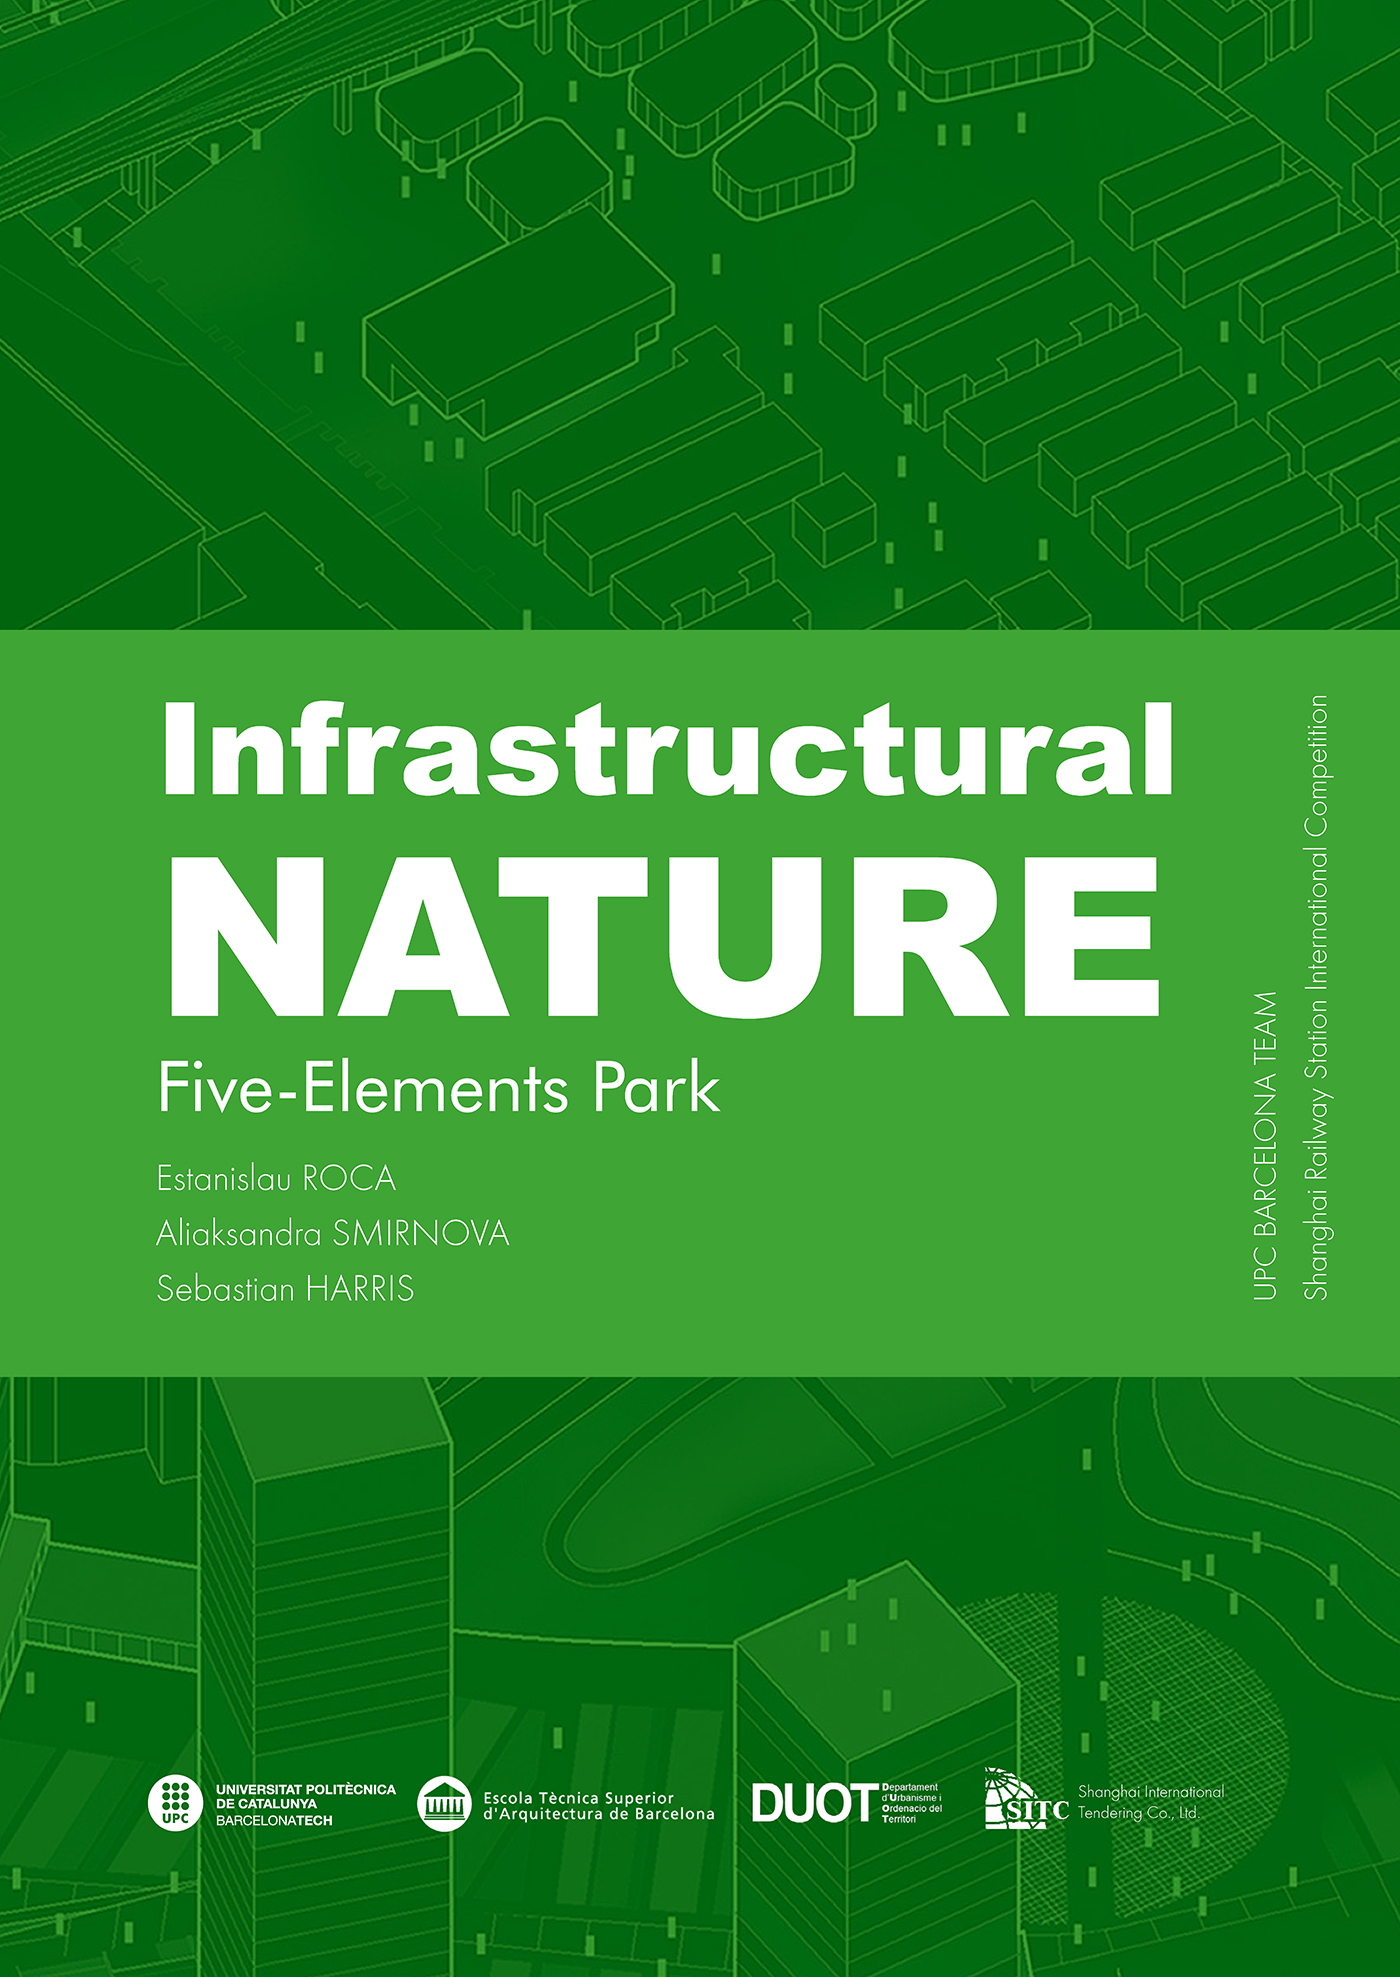 Infrastructural nature